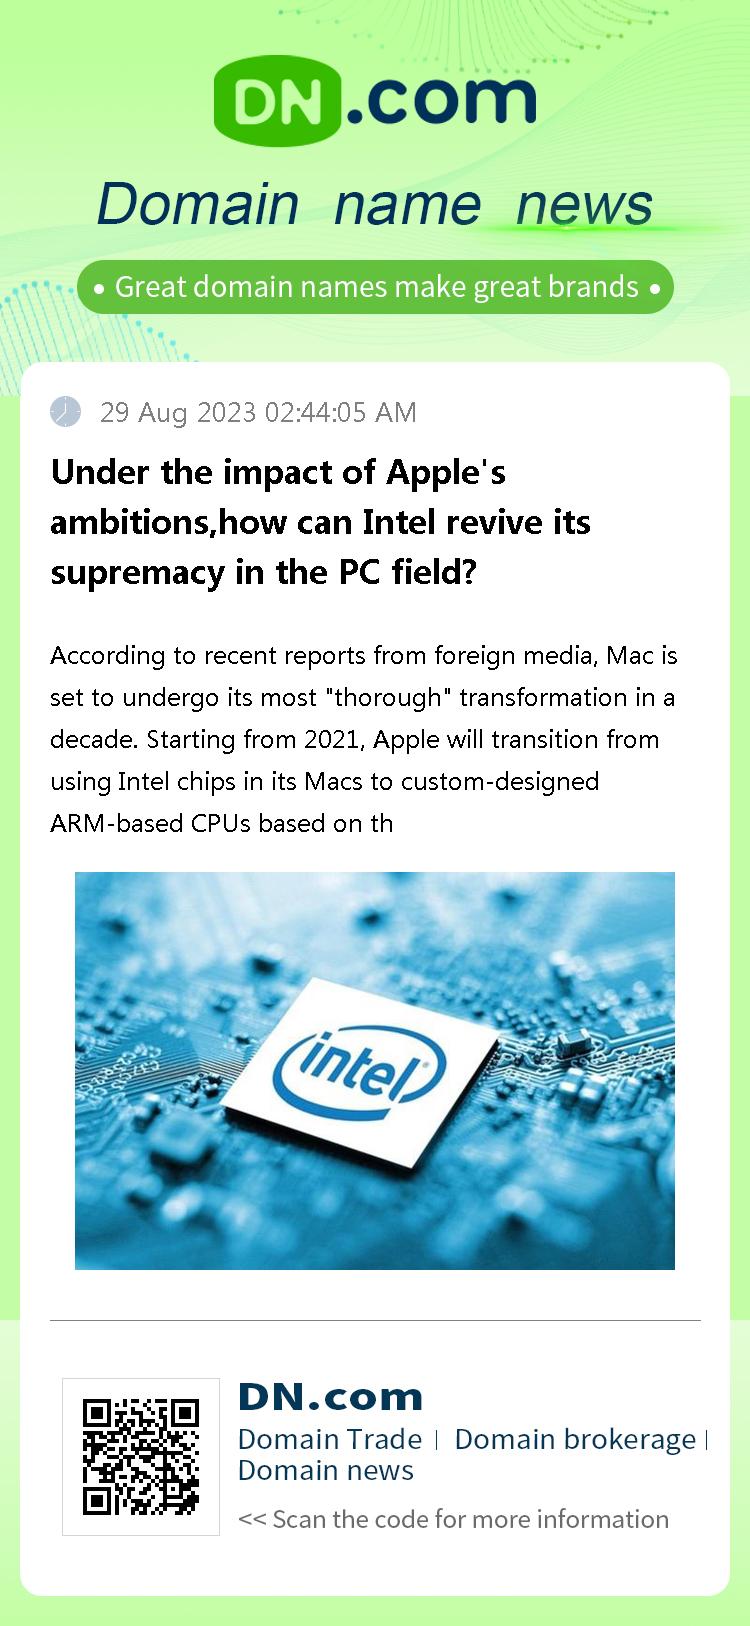 Under the impact of Apple's ambitions,how can Intel revive its supremacy in the PC field?